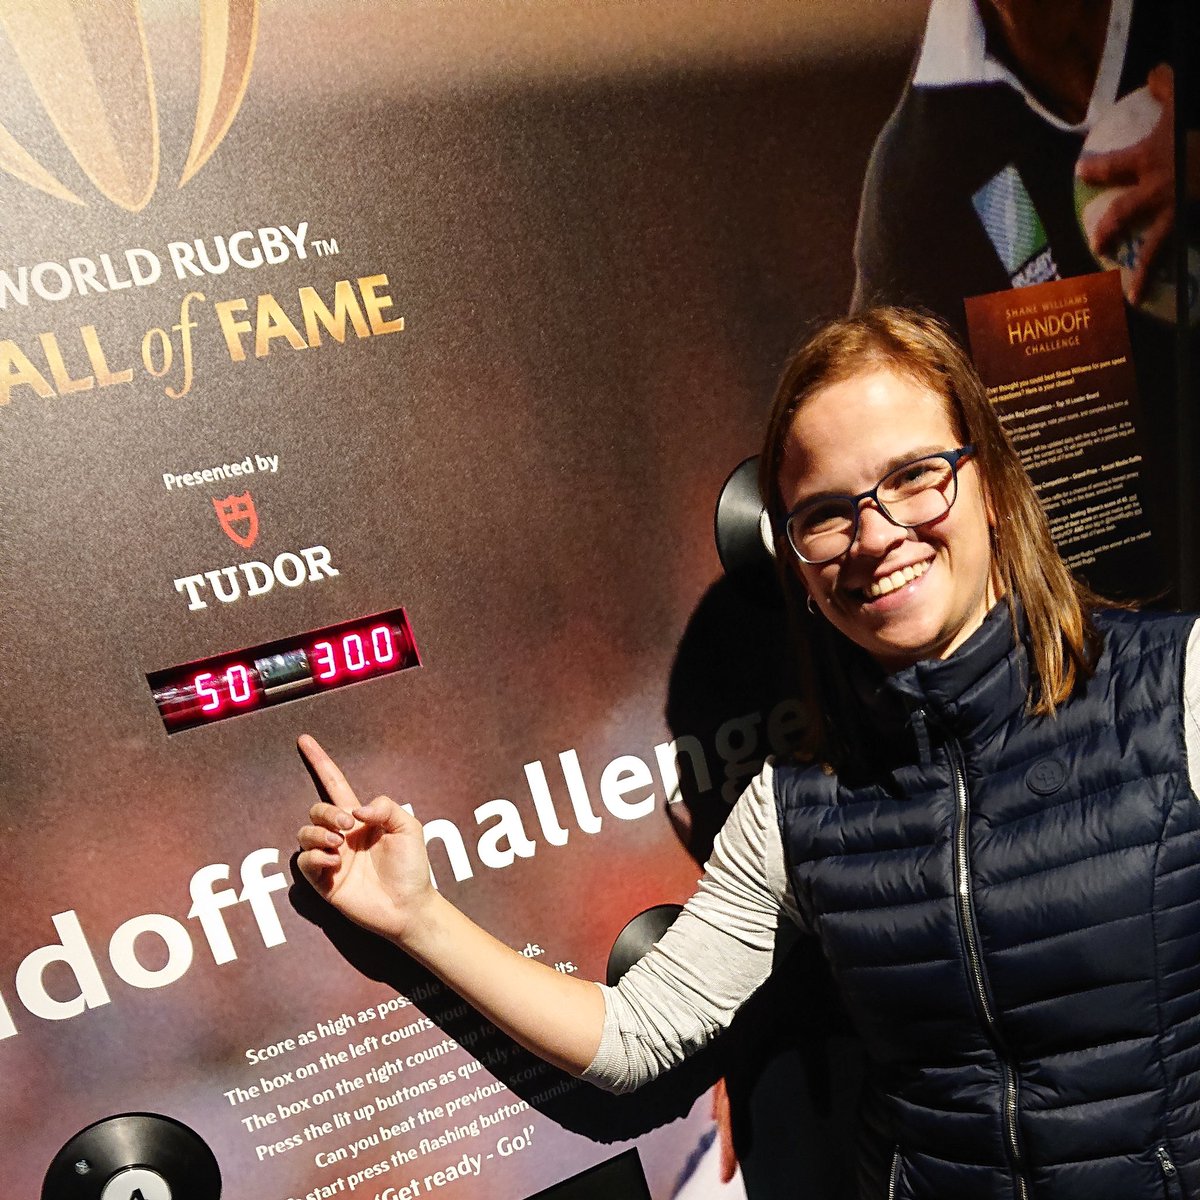 Some great fun at the @WorldRugby Hall of fame today. Even beat Shane Williams score. #WorldRugbyHoF #50